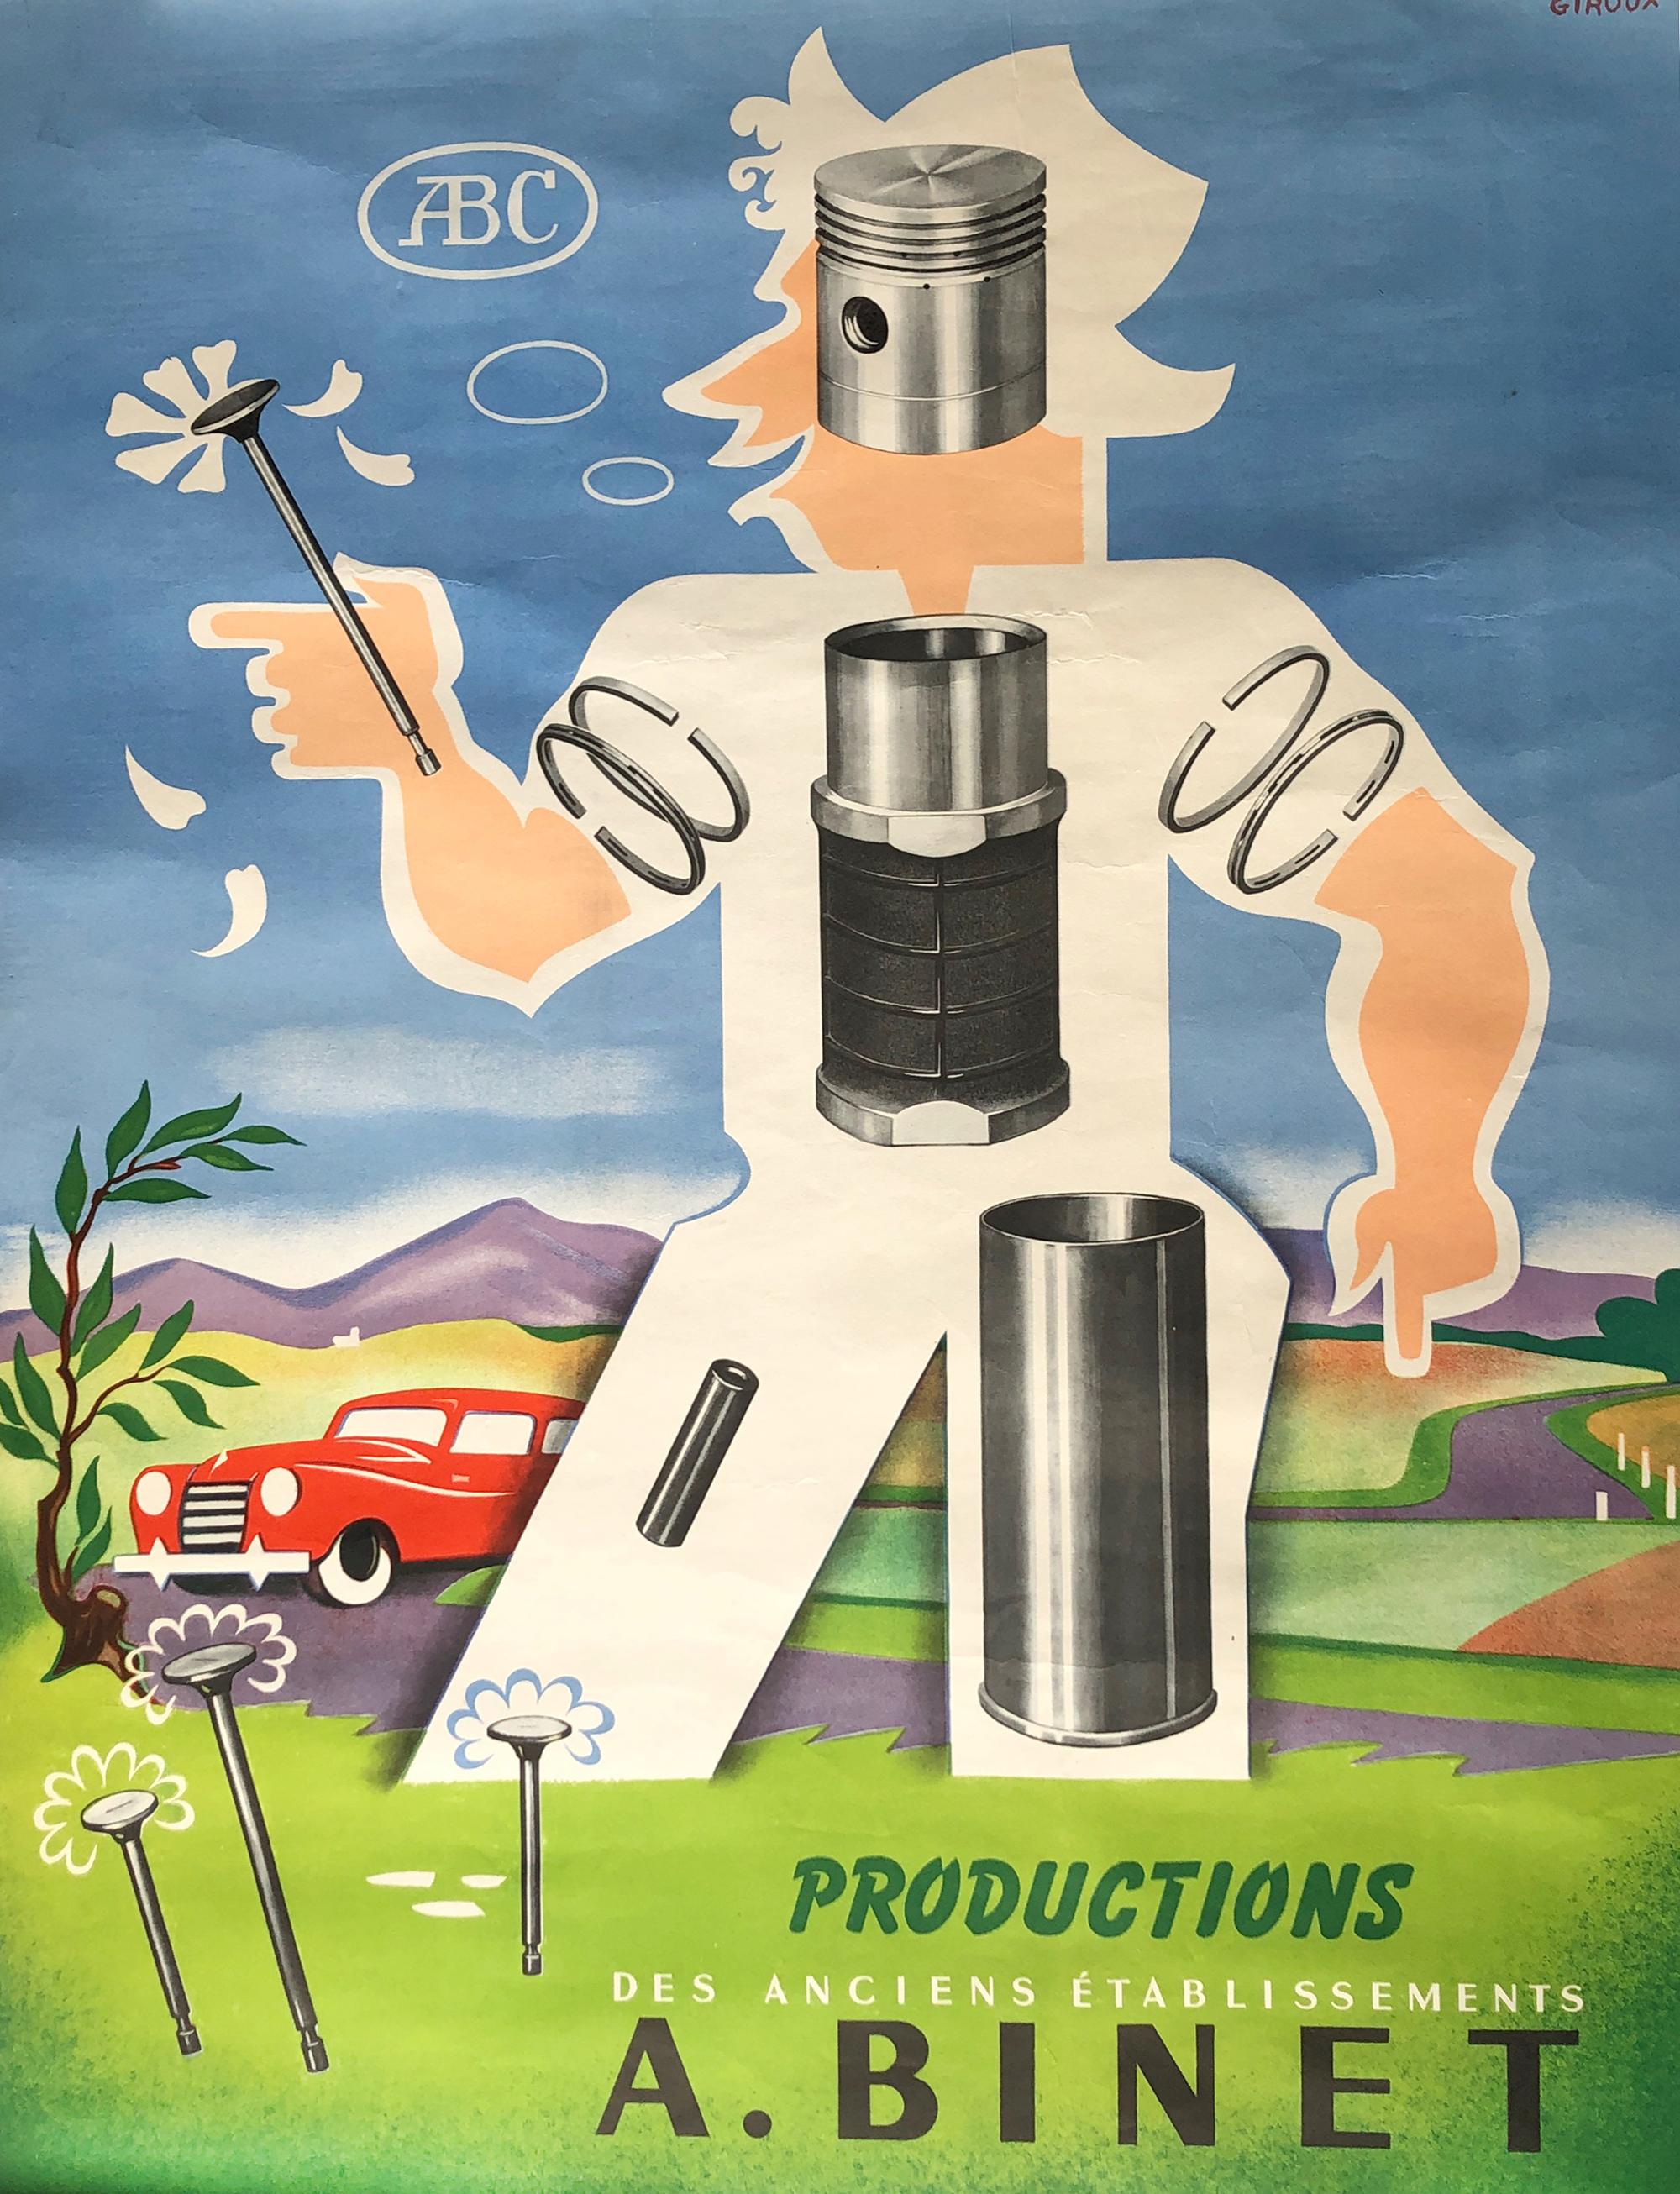 Mid-Century Andre Giroux ABC Poster for A. Binet Auto Parts Productions. Printed in France. 